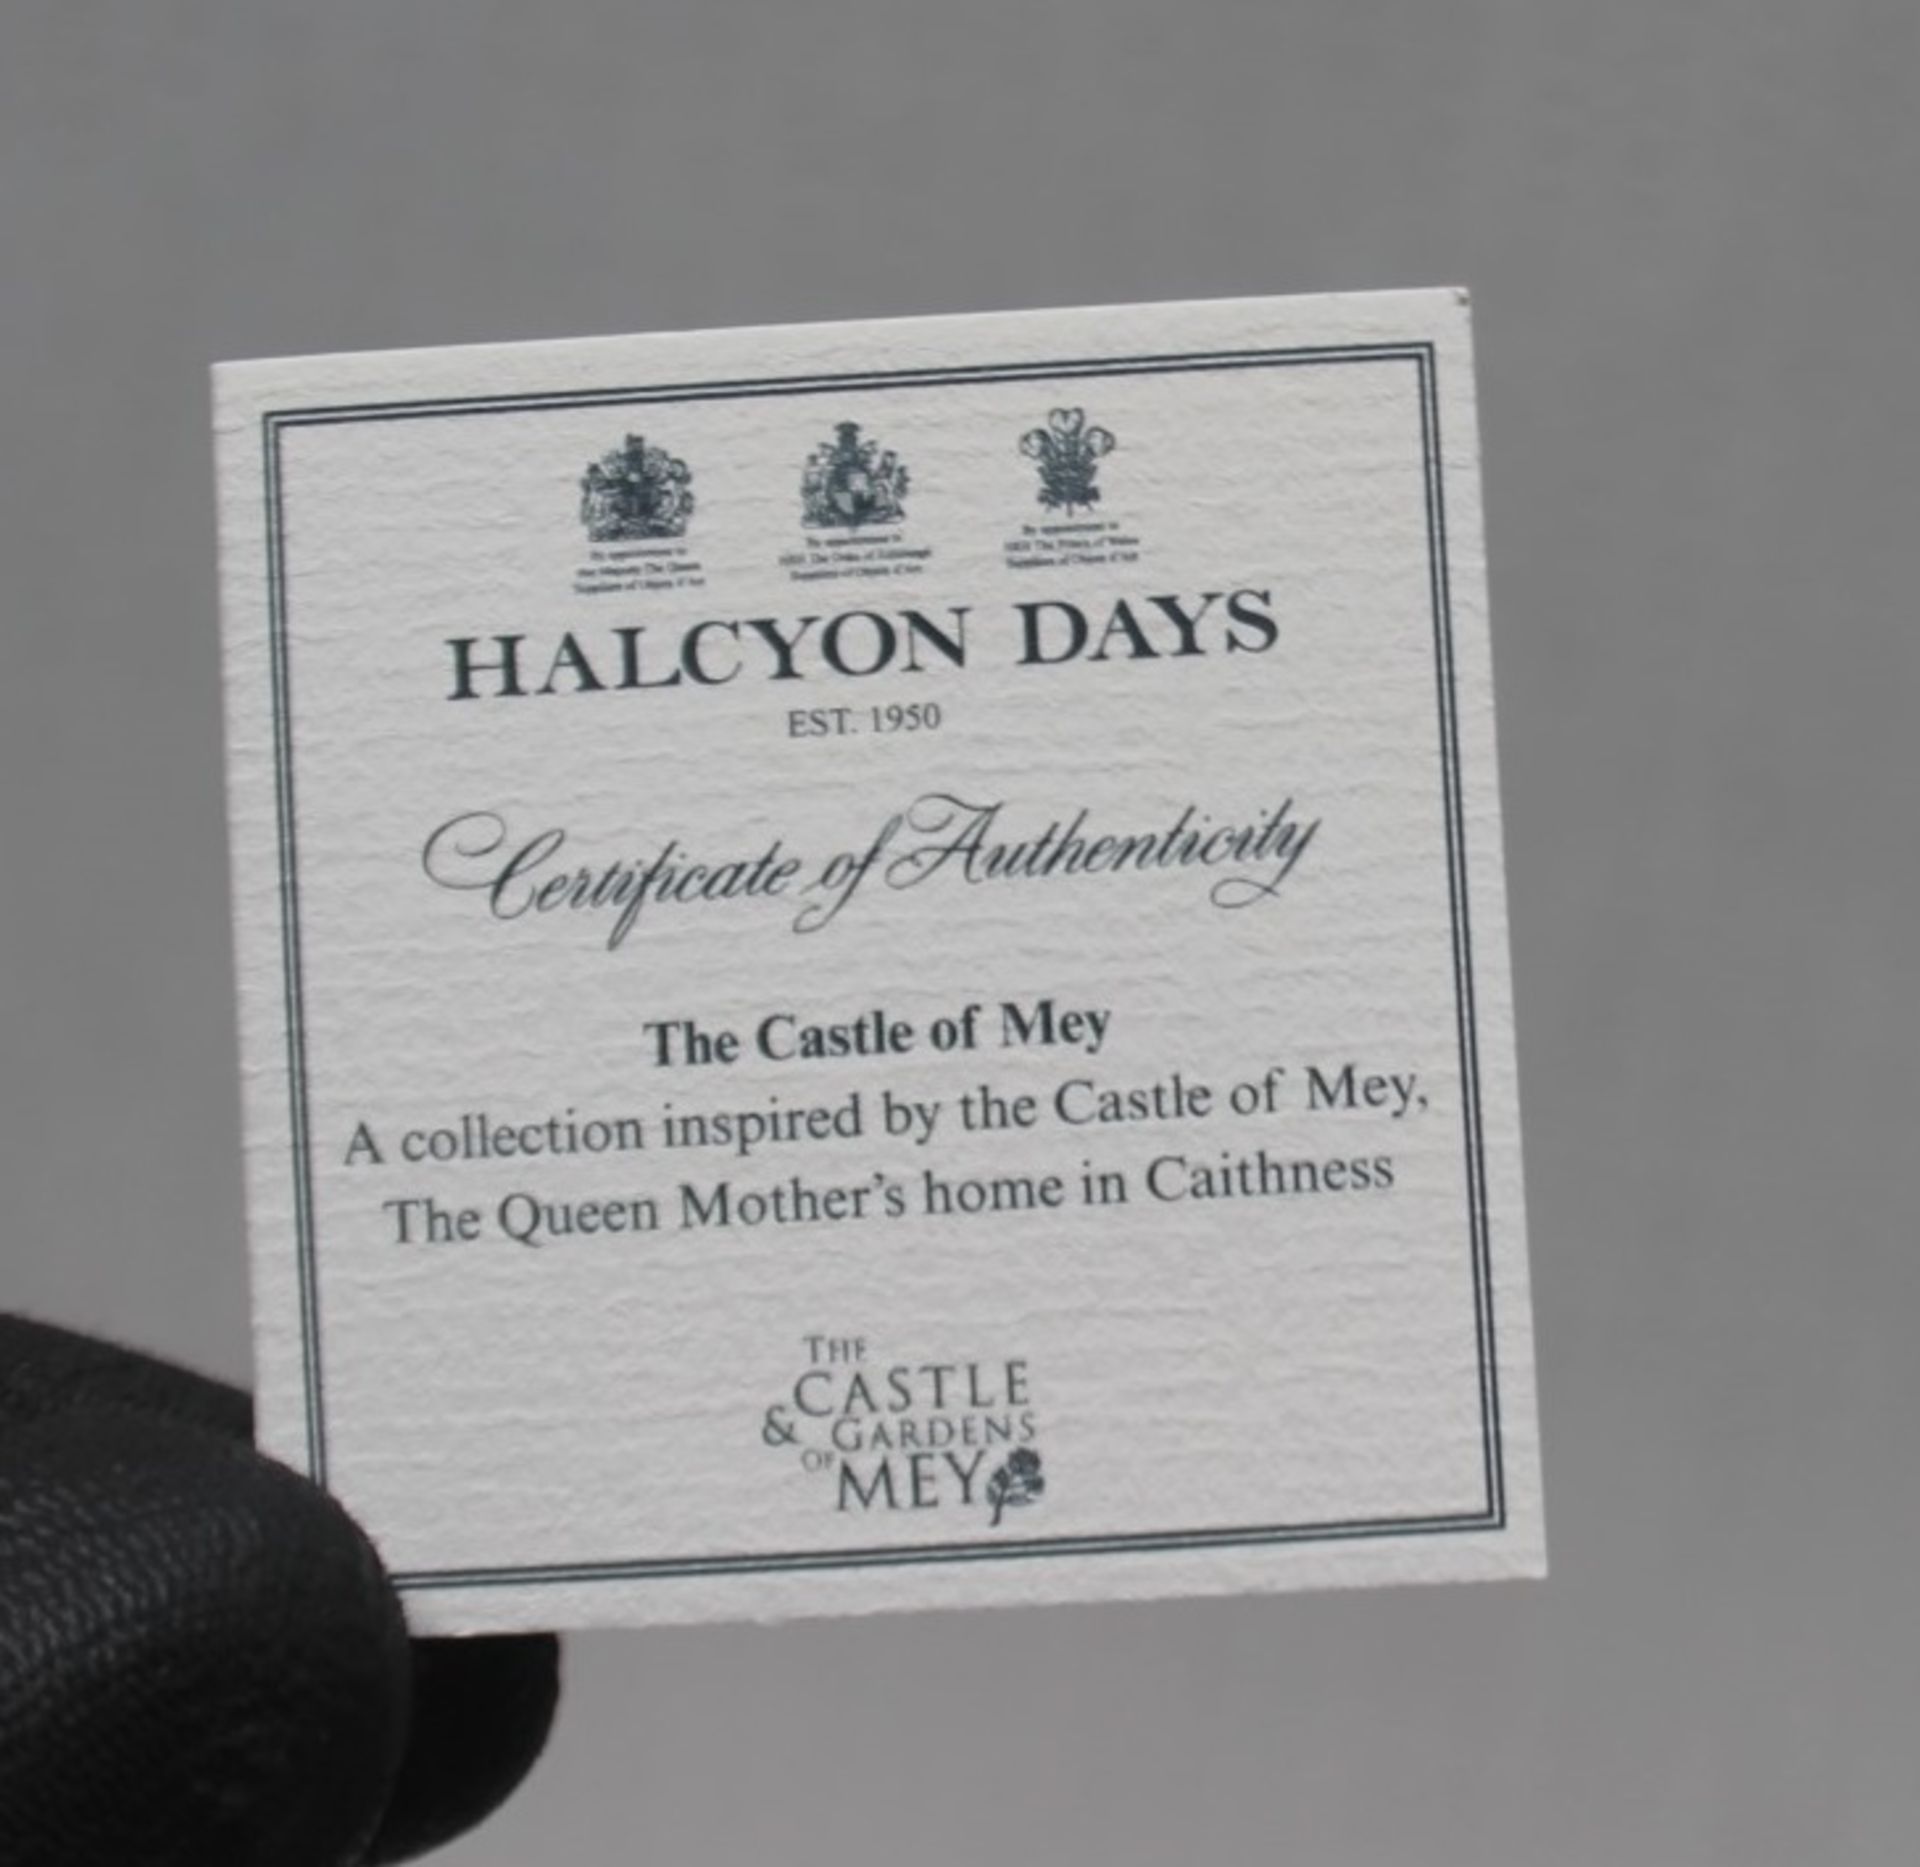 1 x HALCYON DAYS Fine Bone China Castle Of Mey Rose 8" Collectable Plate - Original Price £59.95 - Image 5 of 5